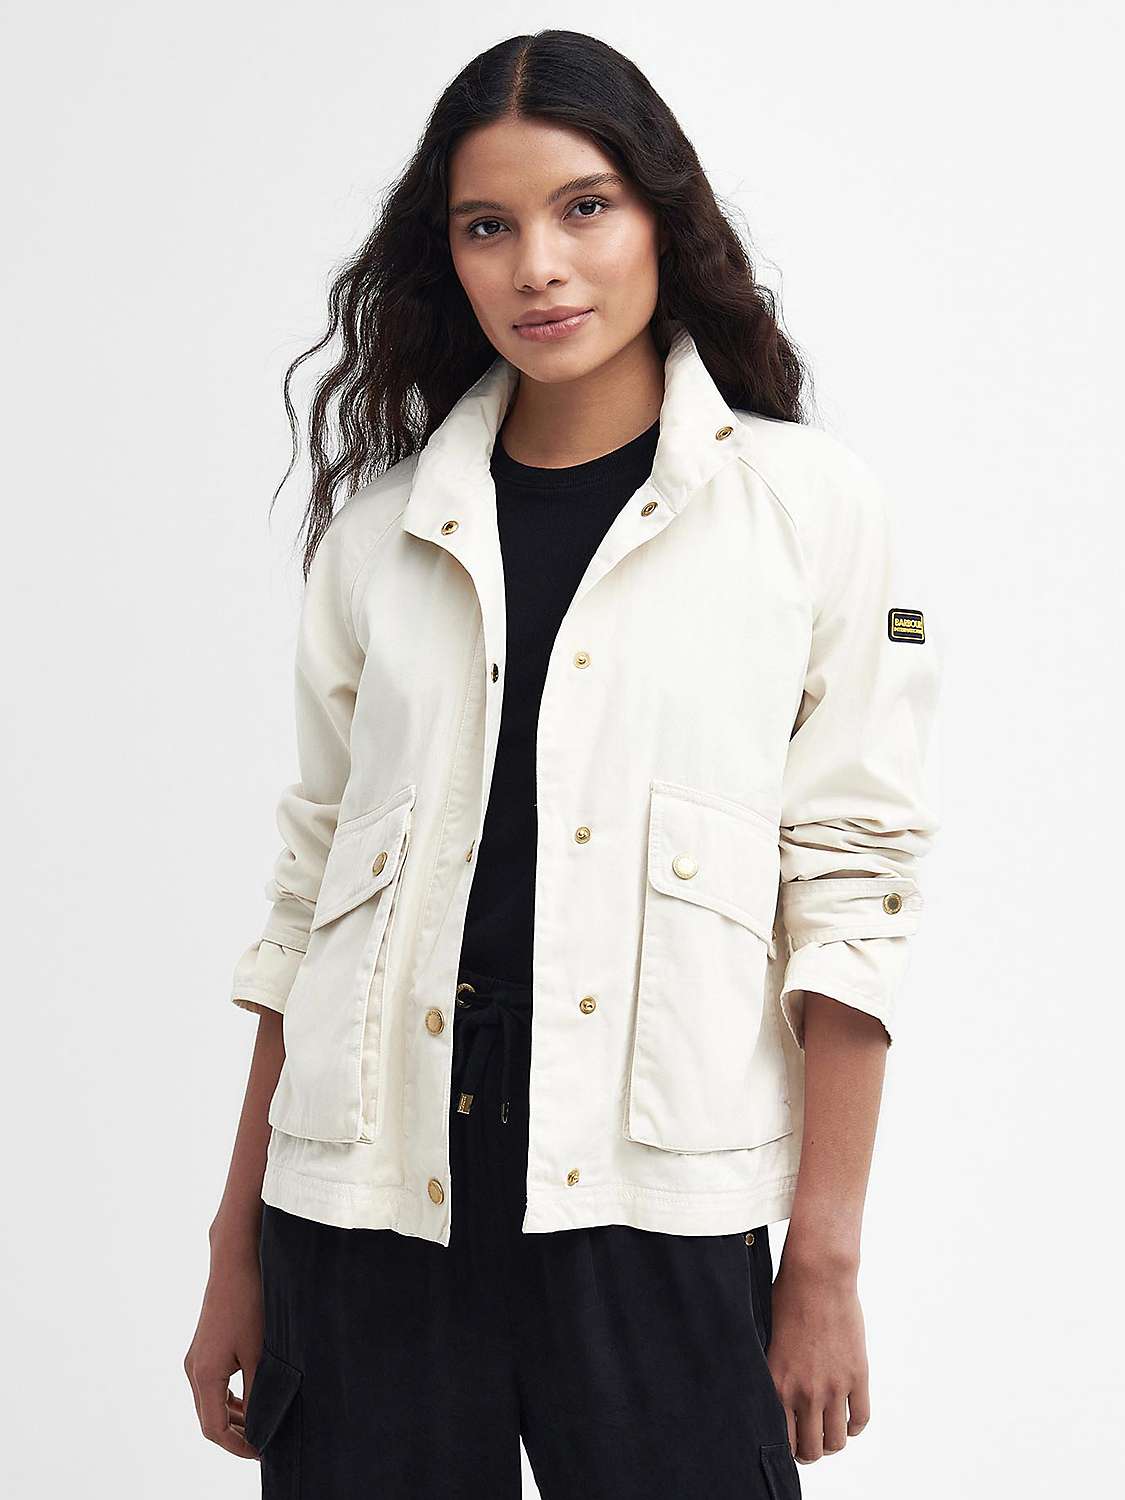 Buy Barbour International Whiston Casual Jacket, Blanc Online at johnlewis.com